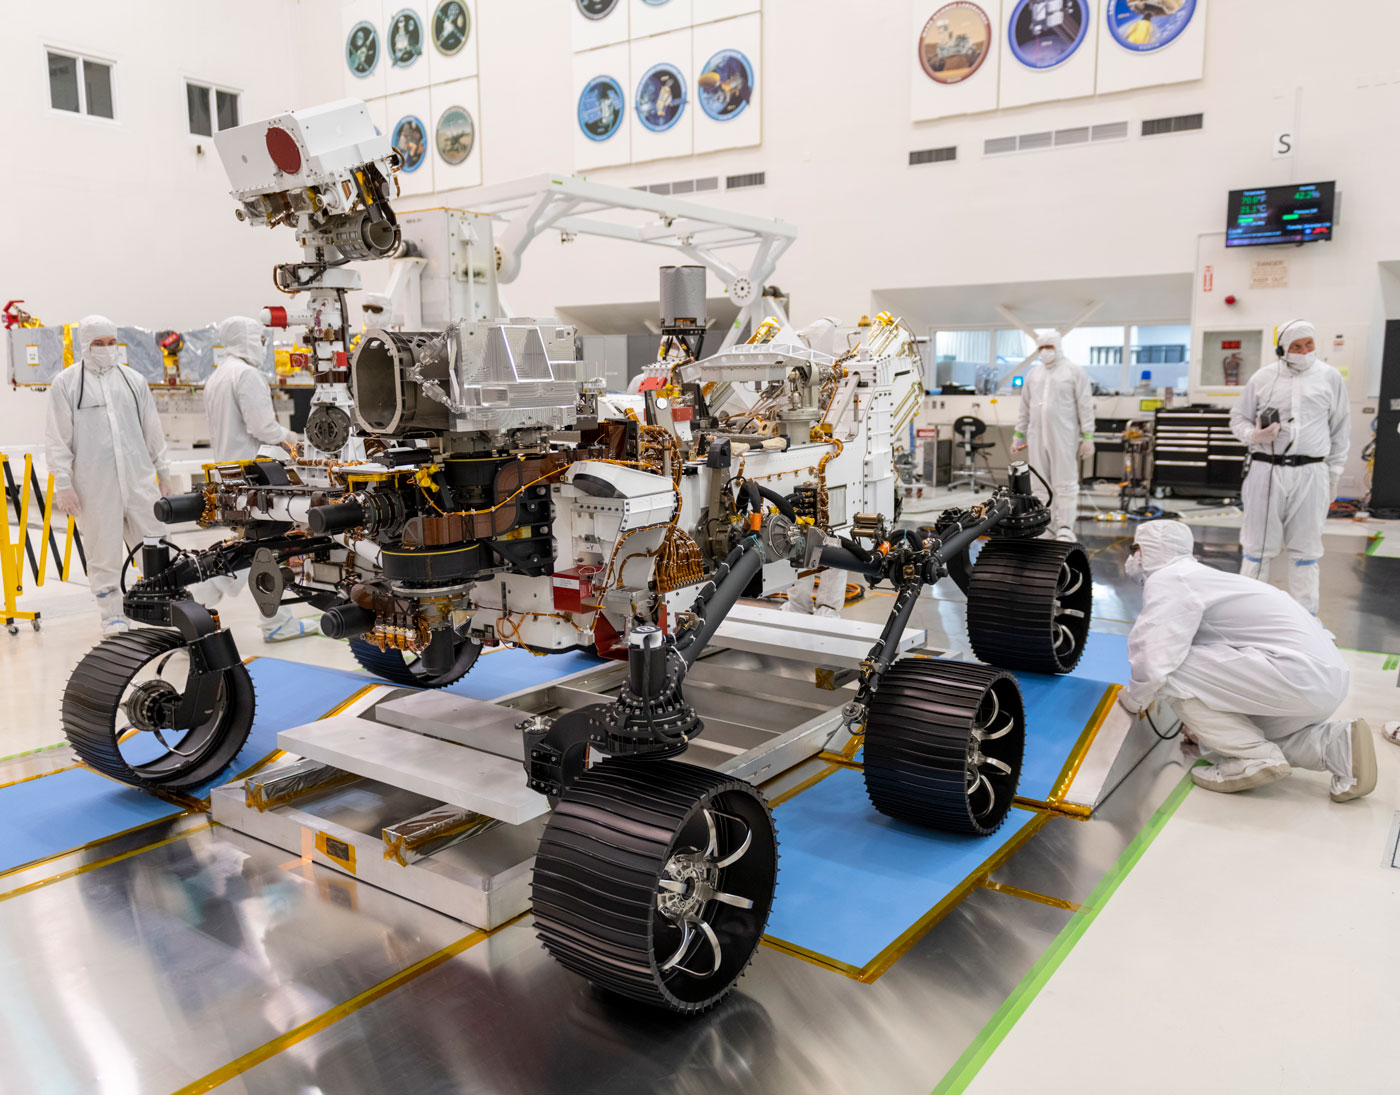 In a clean room at NASA's Jet Propulsion Laboratory in Pasadena, California, engineers observed the first driving test for NASA's Mars 2020 rover on Dec. 17, 2019.